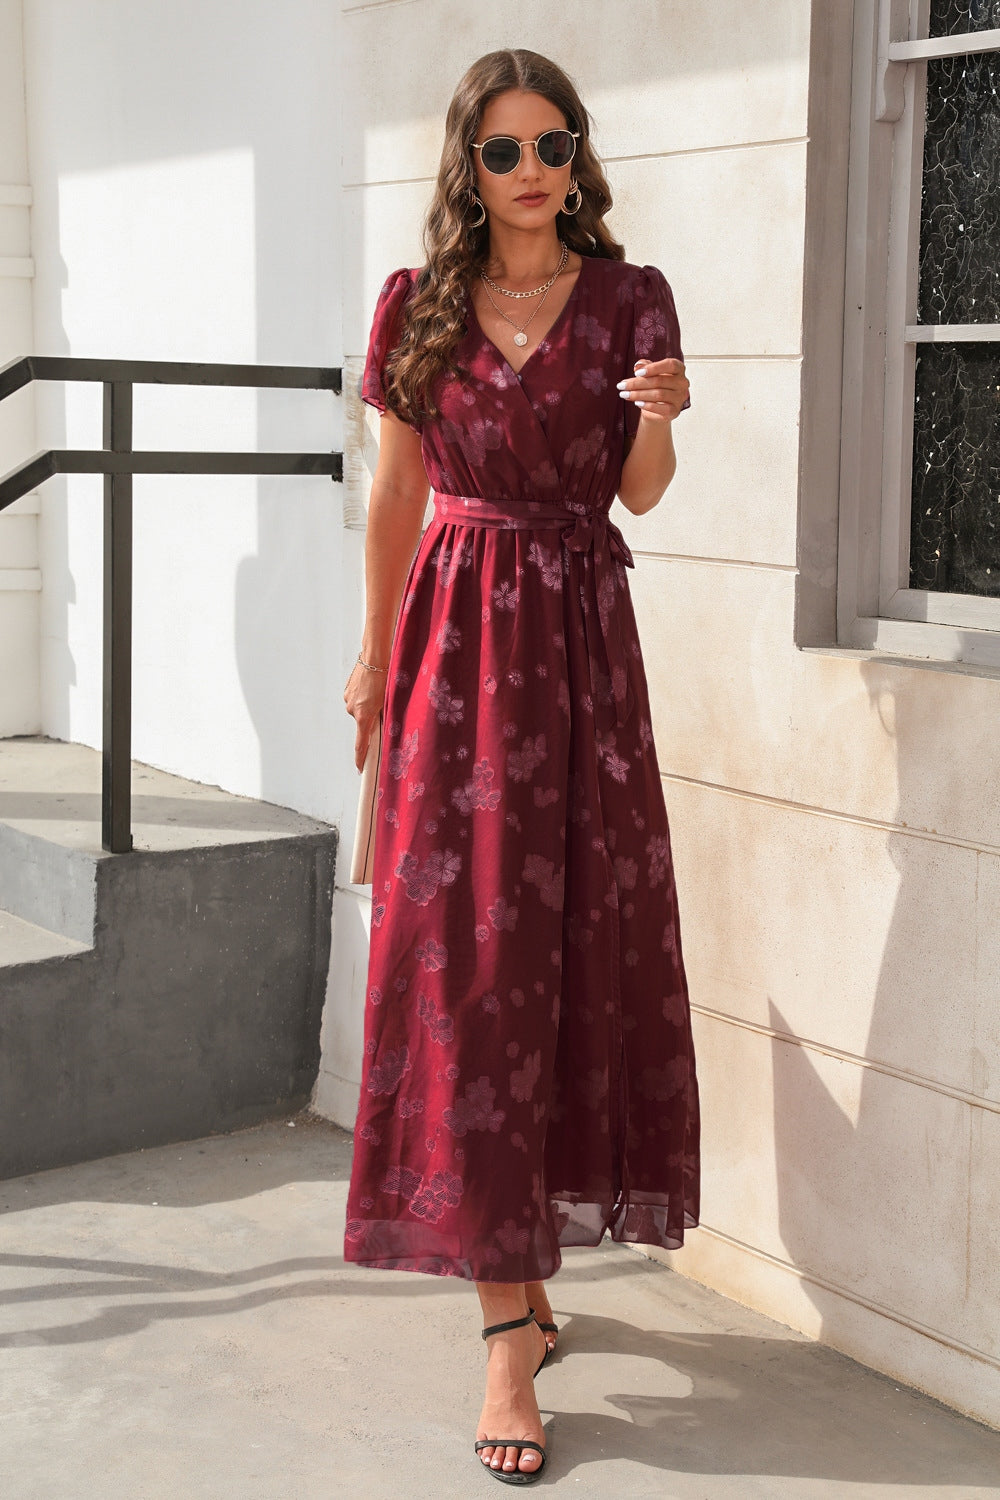 Chic Slit Tied Floral Dress in 4 hues, perfect for any occasion. Flattering fit, versatile, and designed for all-day elegance